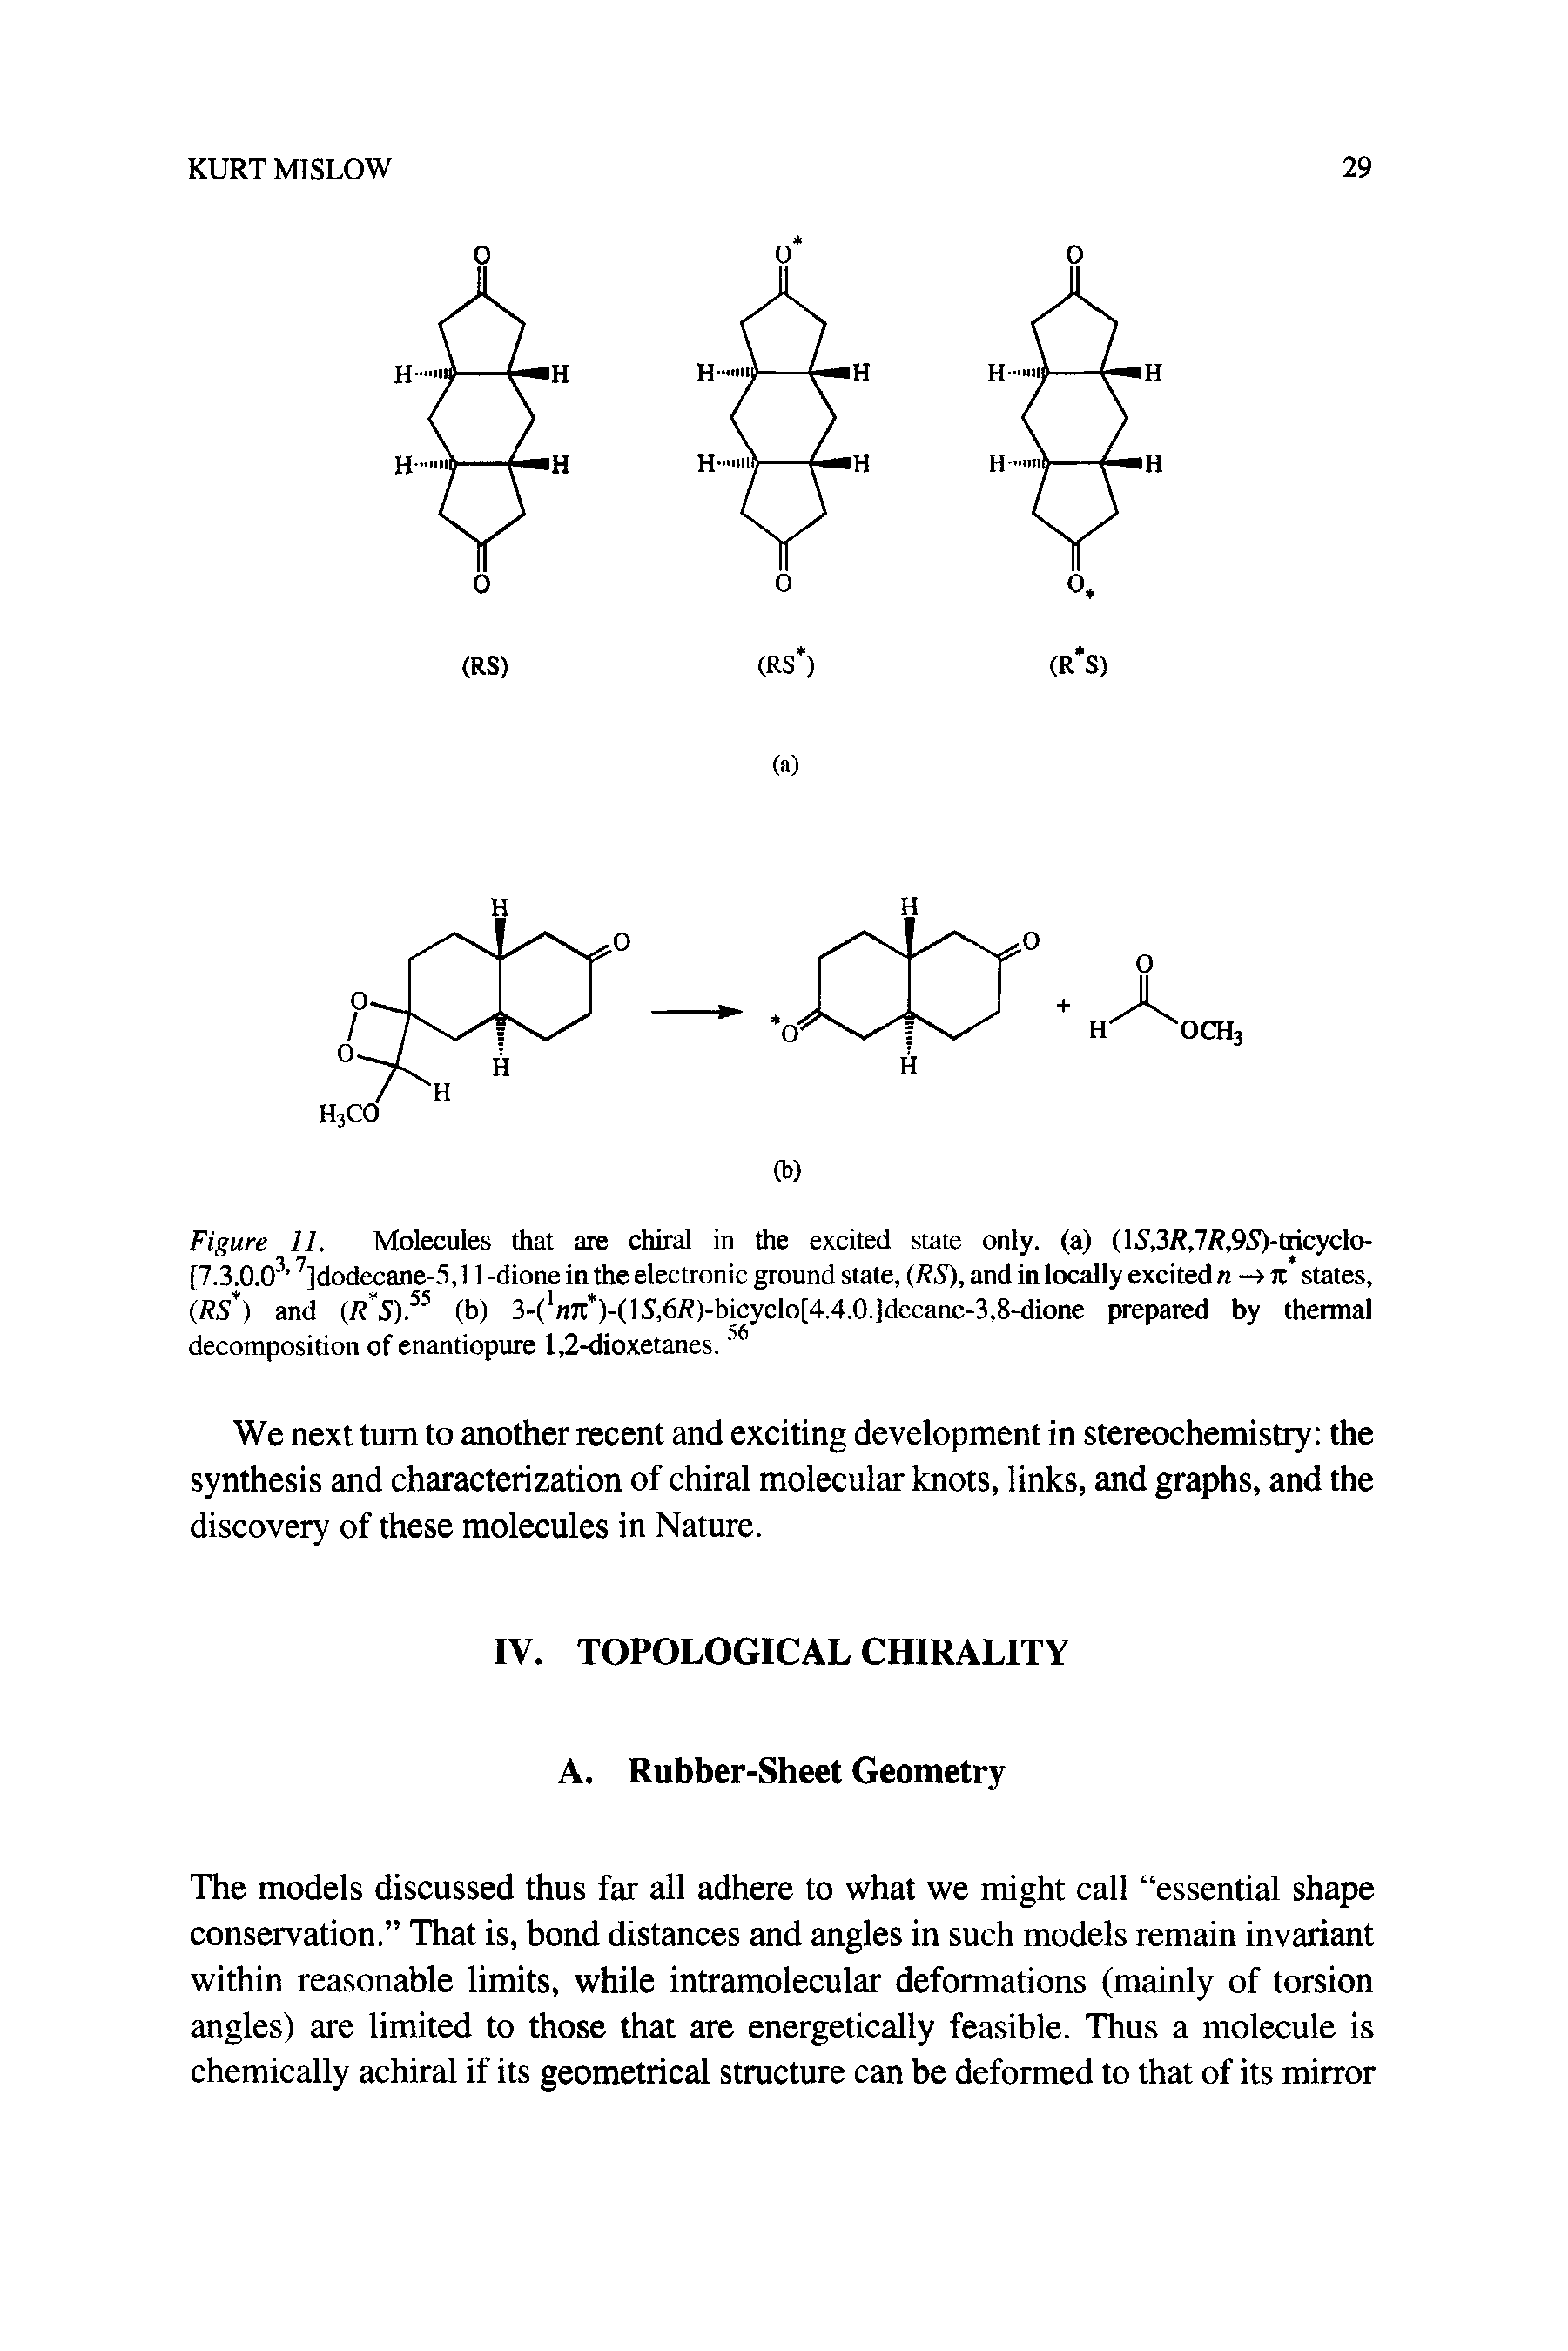 Figure 11. Molecules that are chiral in the excited state only, (a) (lS,3R,7R,9S)-tricyclo-[7.3.0.03 7]dodecane-5,11 -dione in the electronic ground state, (RS), and in locally excited n ->Jt states, (.RS ) and (RS).5S (b) 3-(1nJt )-(lS,6R)-bicyclo[4.4.0.]decane-3,8-dione prepared by thermal decomposition of enantiopure 1,2-dioxetanes. 56...